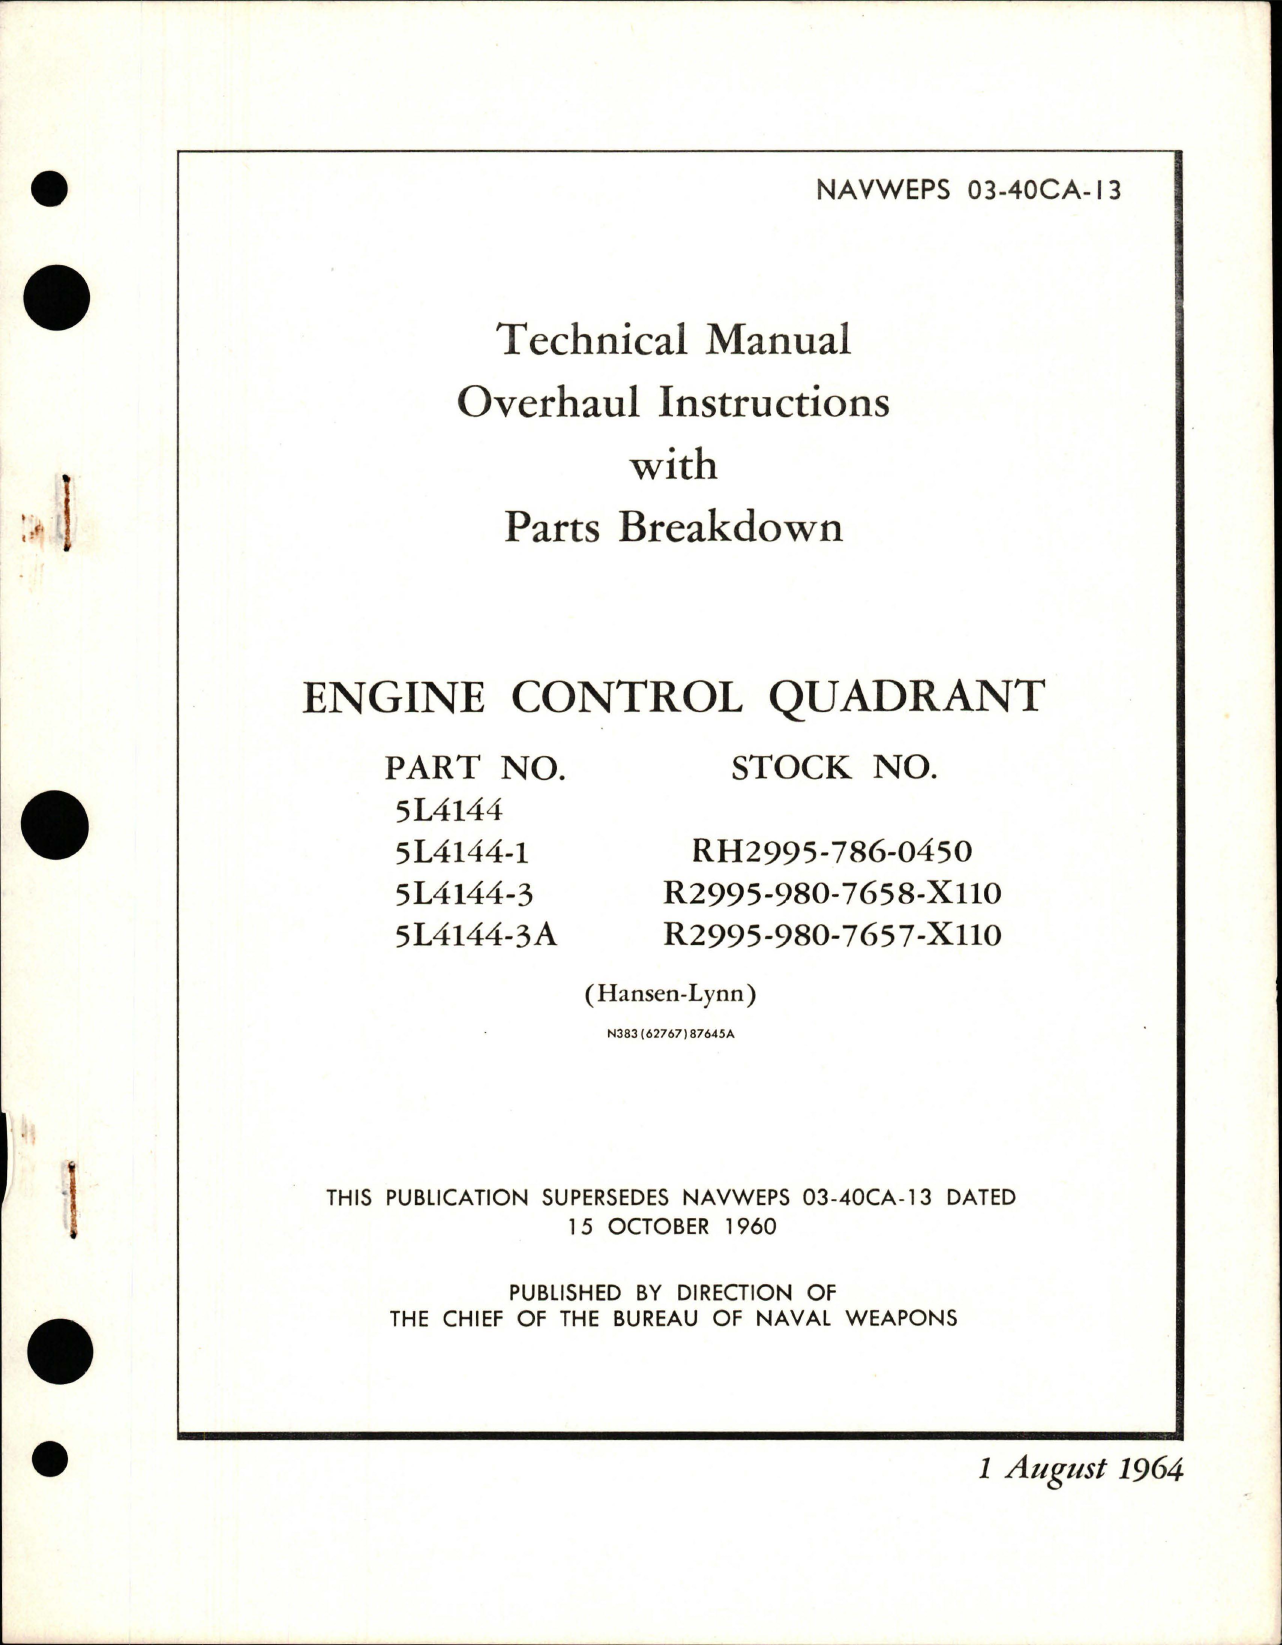 Sample page 1 from AirCorps Library document: Overhaul Instructions with Parts Breakdown for Engine Control Quadrant - Parts 5L4144, 5L4144-1, 5L4144-3, and 5L4144-3A 